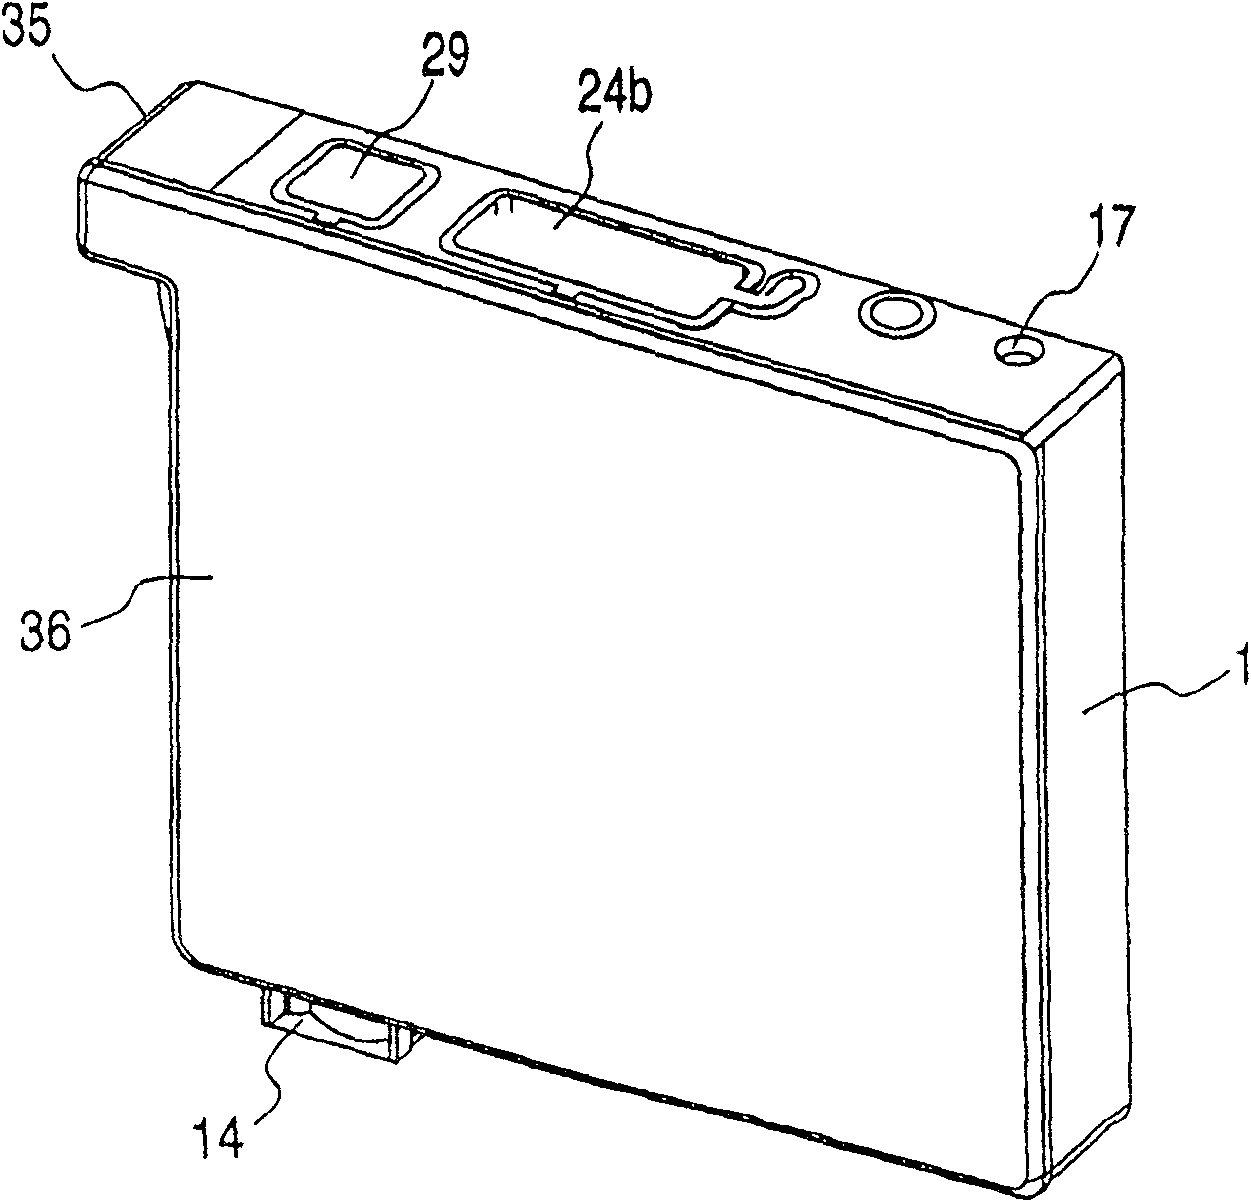 Ink cartridge for ink jet recording device